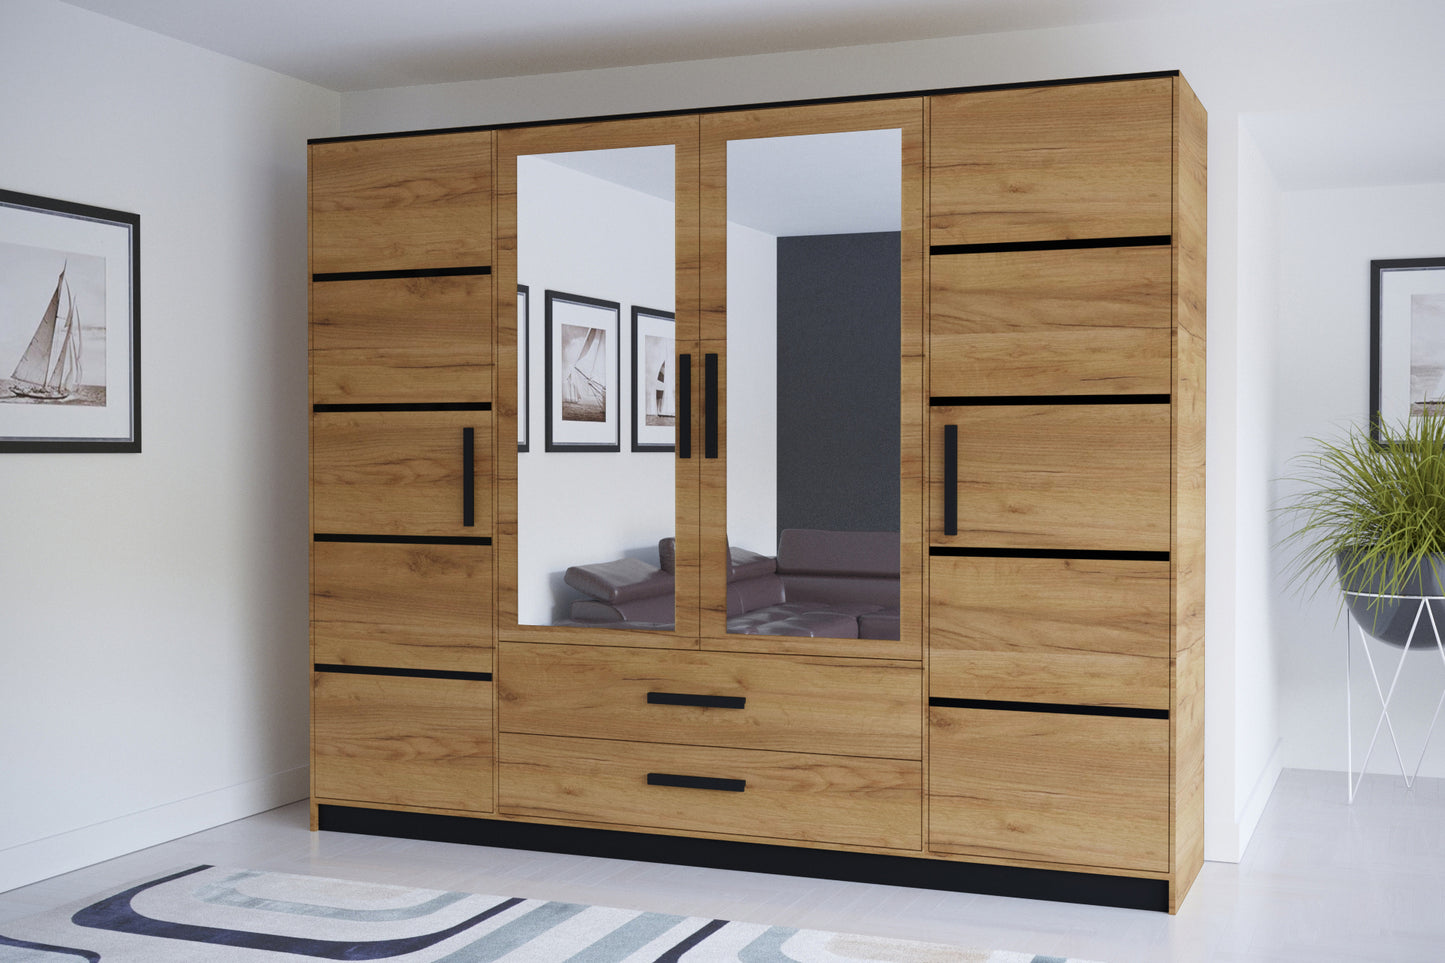 MANTA 201 - Wardrobes Drawers Shelves Rail Hinged Doors Mirror Craft Oak Gold + Black - ASSEMBLY INCLUDED - FAST DELIVERY